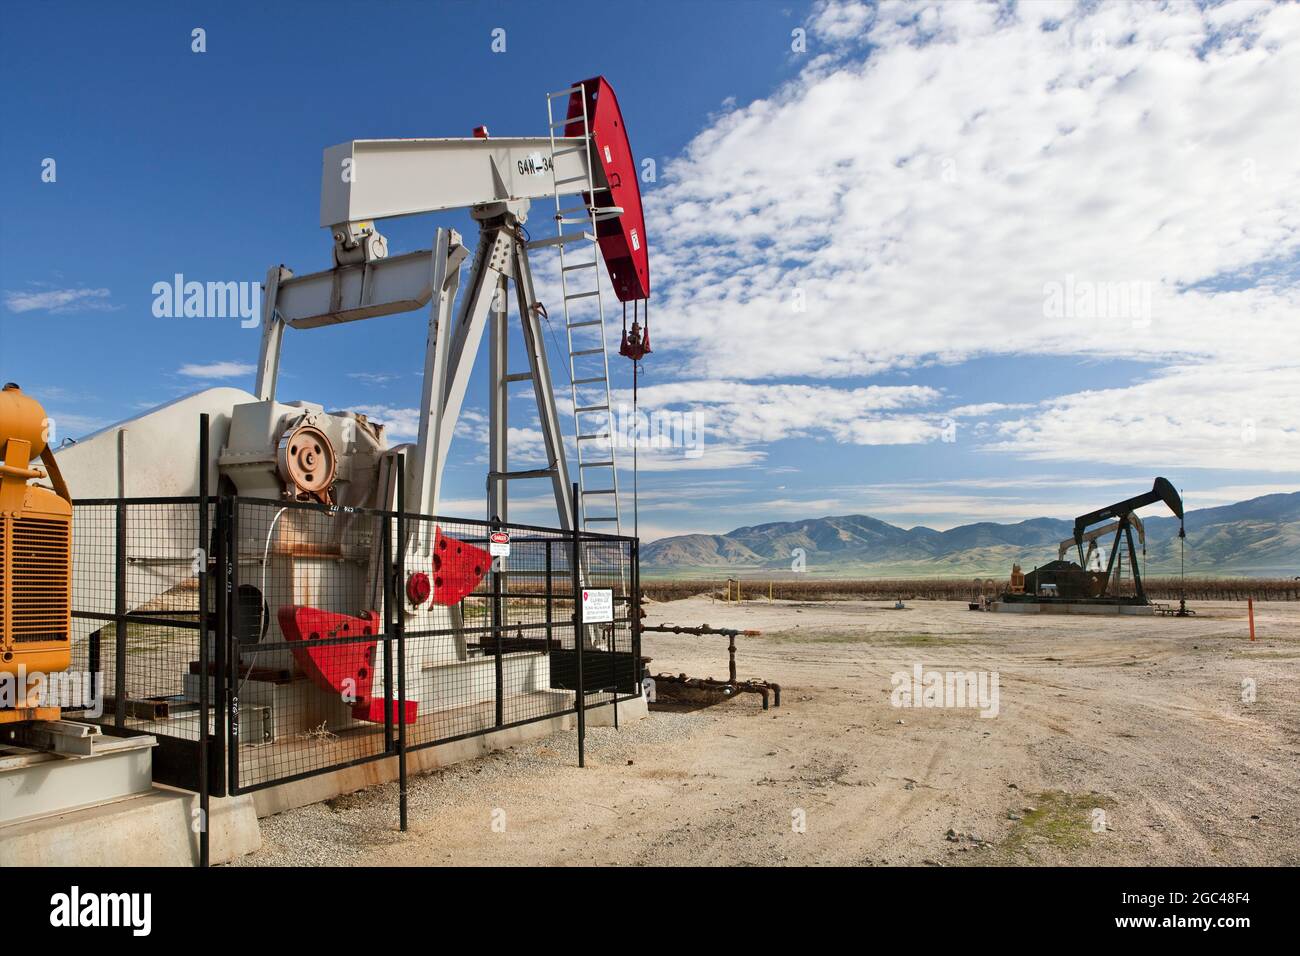 Oil wells with pumps and grape vines in distance at Kern Co. Stock Photo